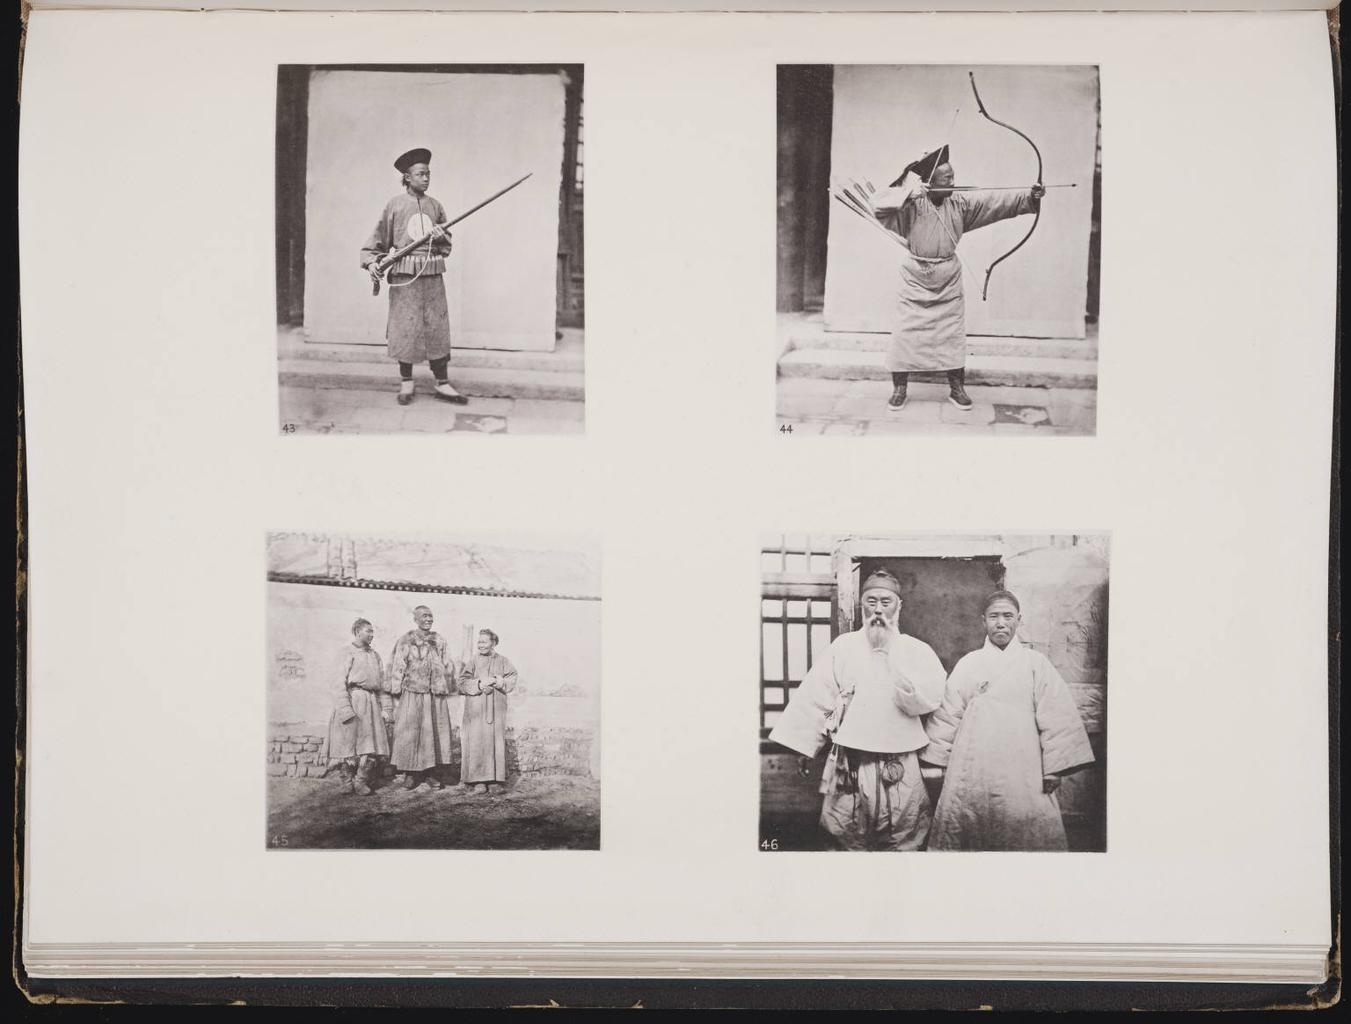 [John+Thomson,+Illustrations+of+China+and+Its+People,+1874;+first+photographic+survey+of+China.+Yale+University+Library.JPG]